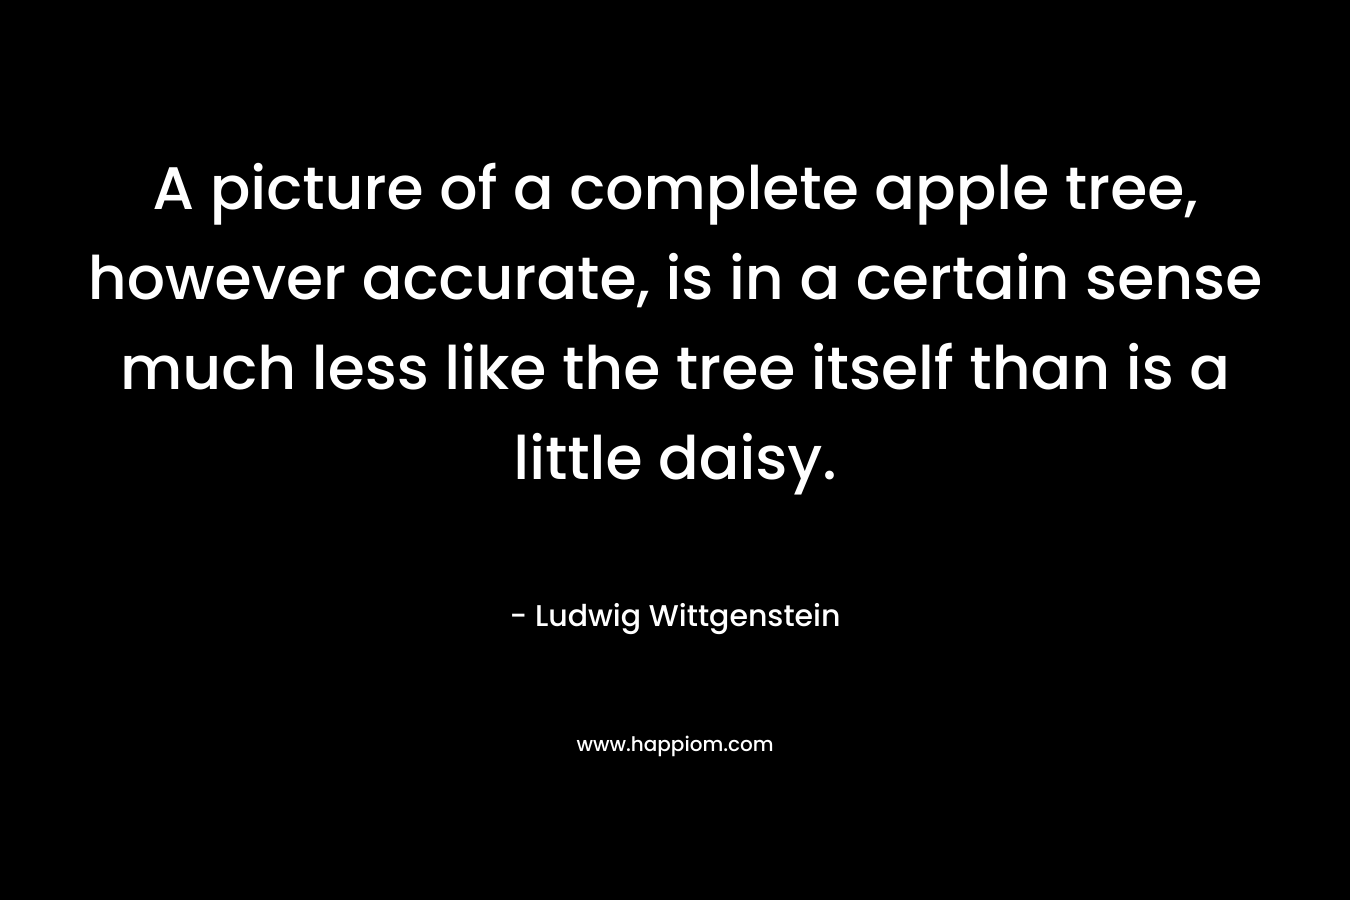 A picture of a complete apple tree, however accurate, is in a certain sense much less like the tree itself than is a little daisy. – Ludwig Wittgenstein